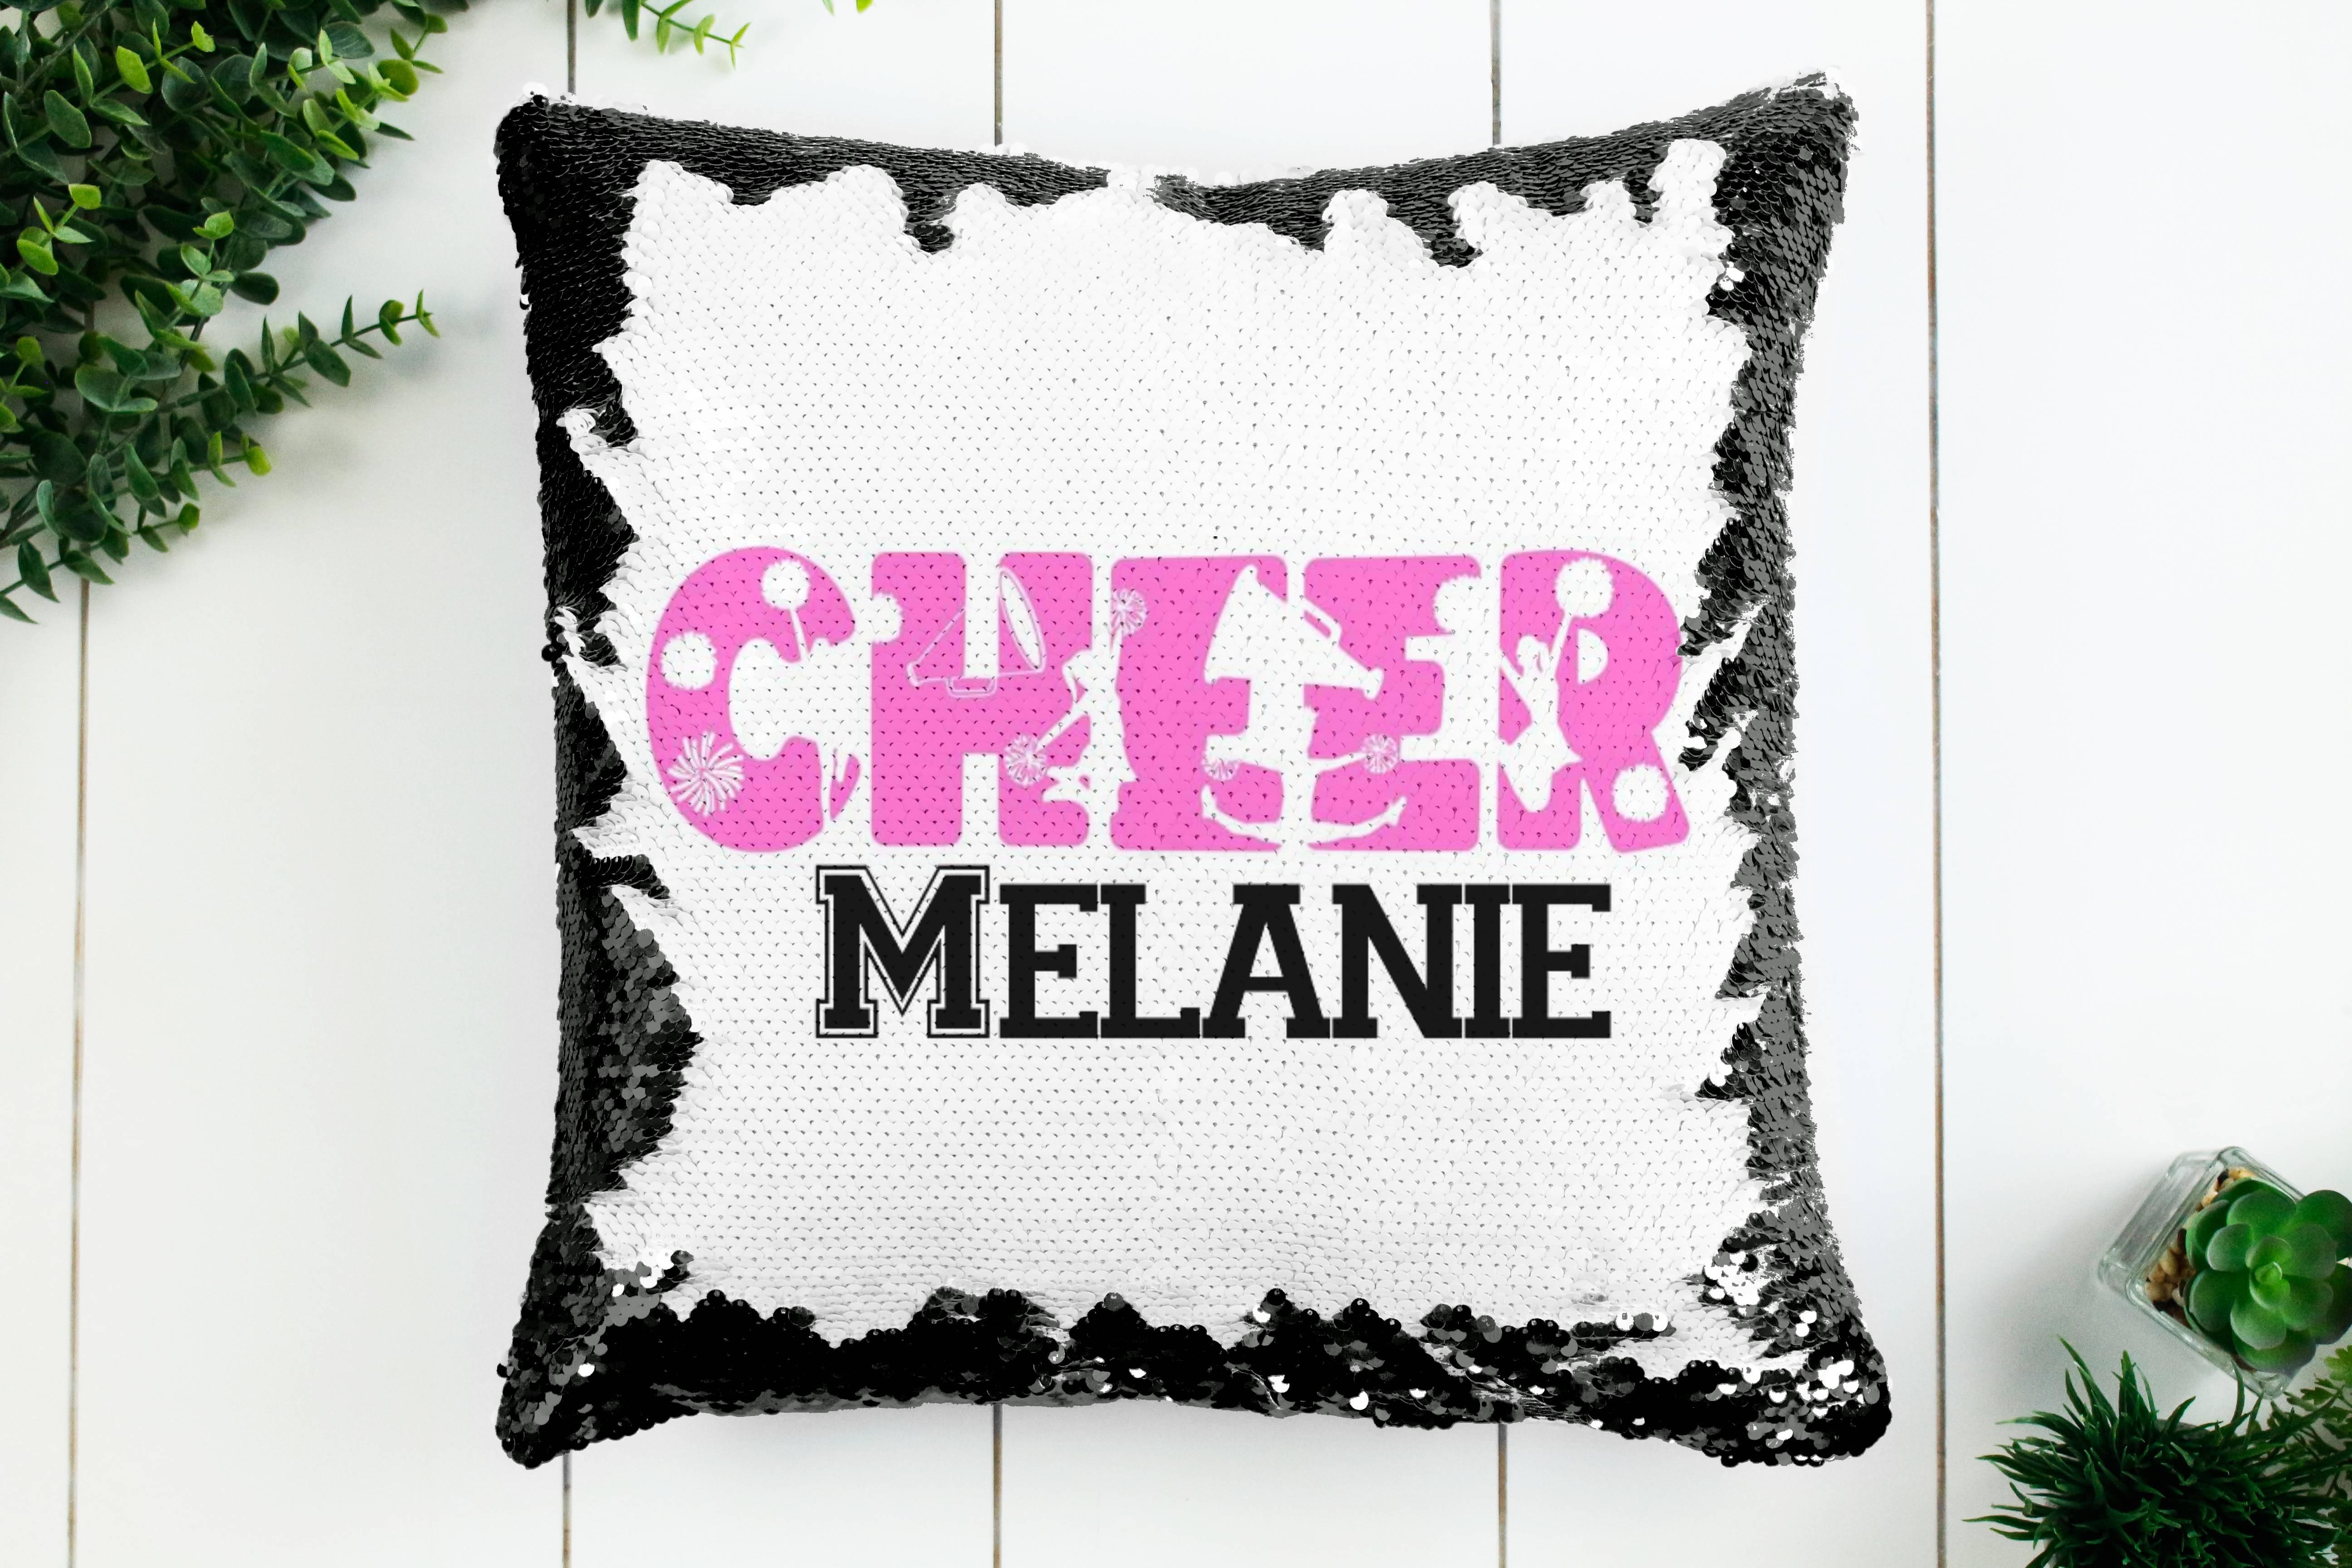 Personalized Cheer Gifts, Cheerleader Team Gift Ideas, Cheer Birthday Party Decor, Cute Gift for Toddler Girls 2, 3, 4, 5, 6, 7 year old, Birthday Gift for Girls, Cheerleader pillow case personalized Sequin Throw Pillowcase Custom Reversible Pillow Decorative Cushion Pillow Cover, Cheer lover gift | Gift for child with Sensory Needs and or Autism,  Birthday Theme Party Supplies